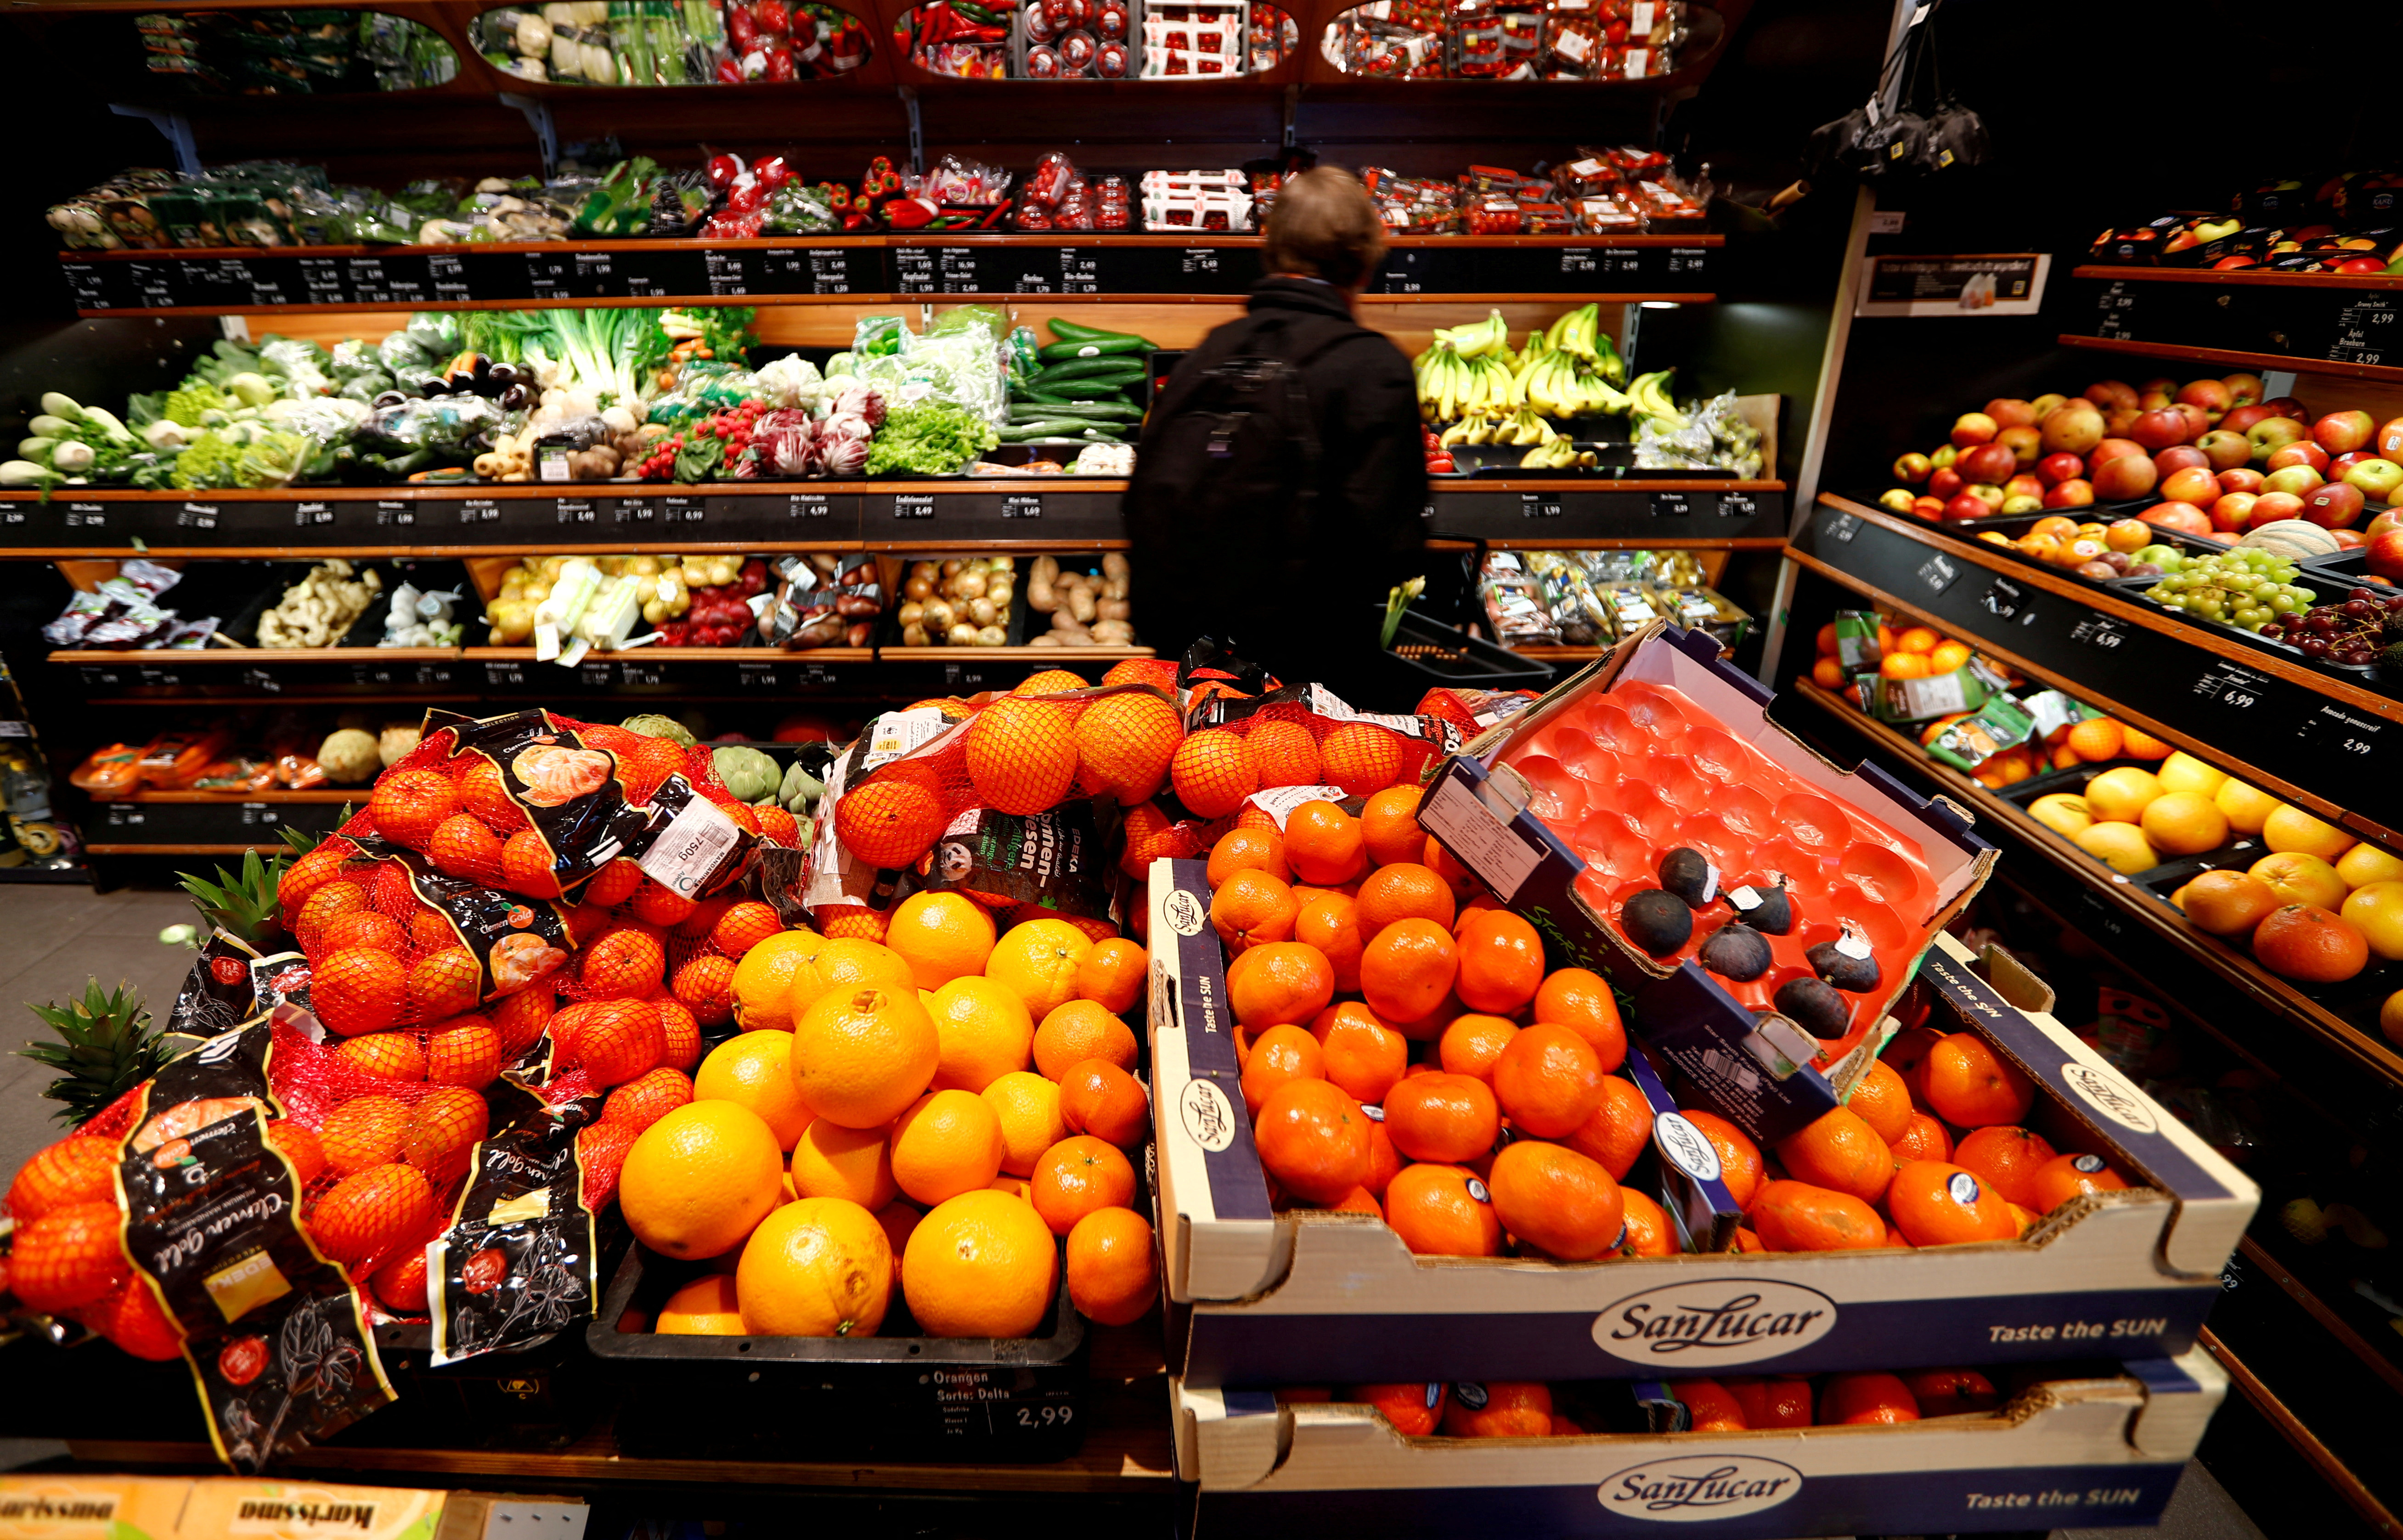 Full shelves with fruits are pictured in a supermarket during the spread of the coronavirus disease (COVID-19) in Berlin